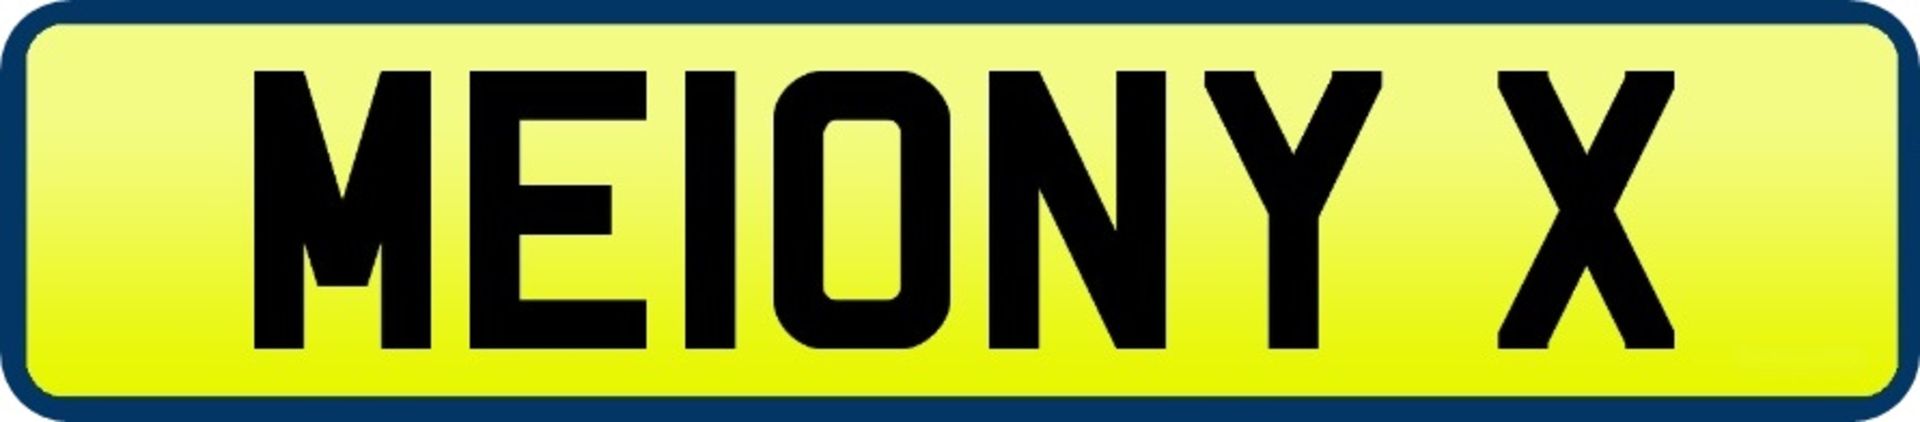 1 x Private Vehicle Registration Car Plate - ME10NY X - CL590 - Location: Altrincham WA14